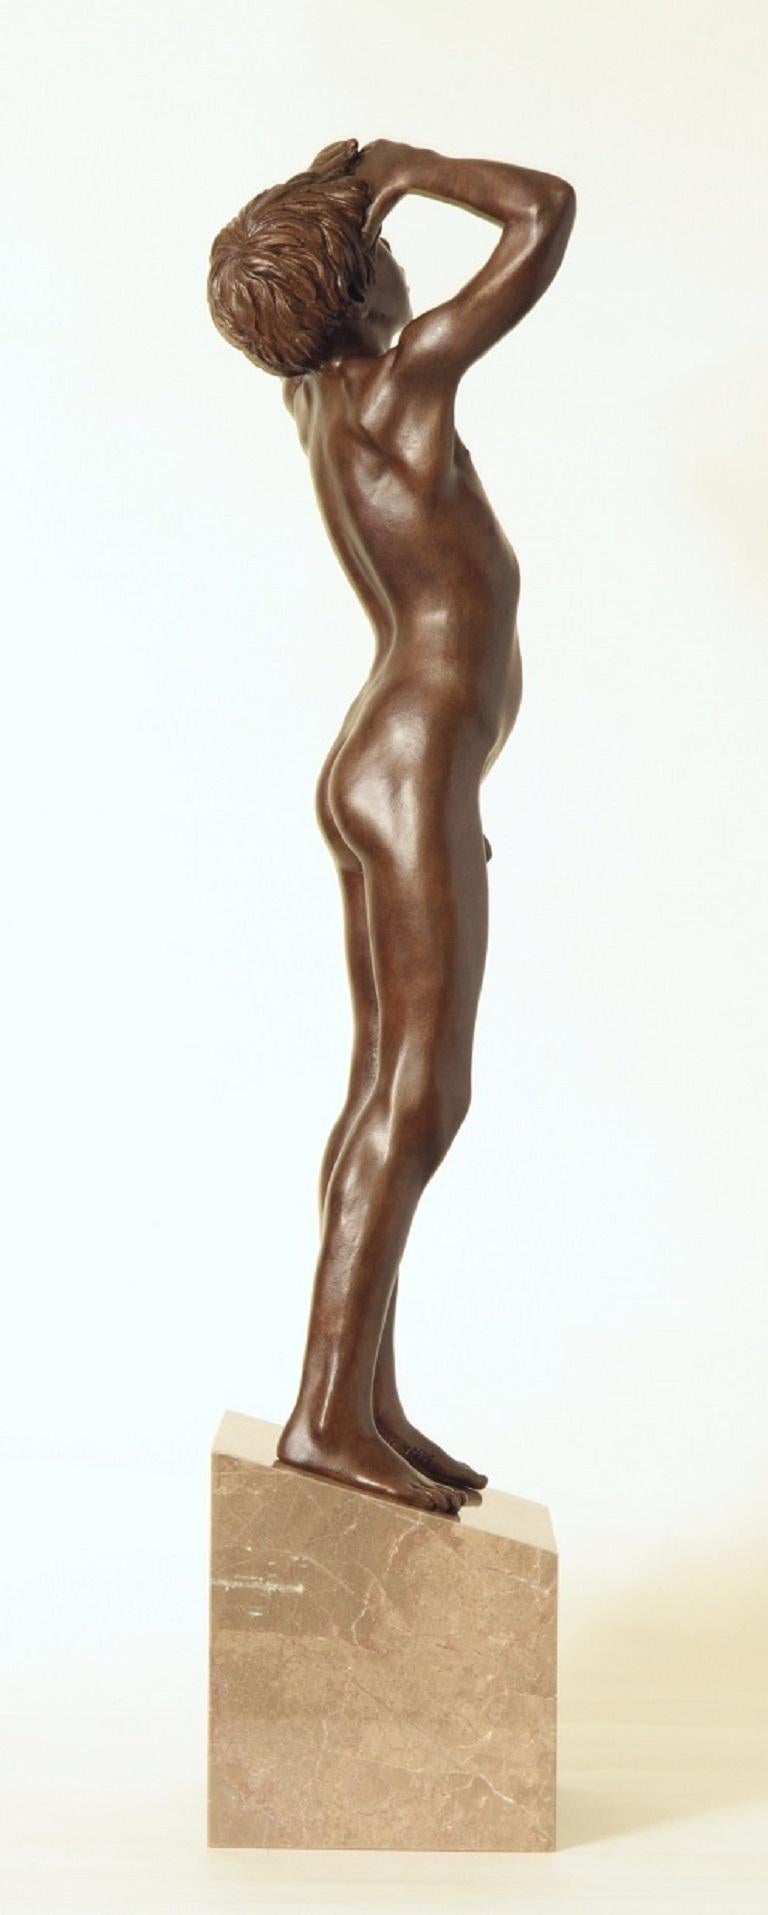 Aquila Bronze Sculpture Nude Boy Marble Stone Contemporary In Stock - Sculpture without Stone is 57 cm high

Wim van der Kant (1949, Kampen) is a selftaught artist. Next to his busy profession as a teacher at a high school, he intensively practises